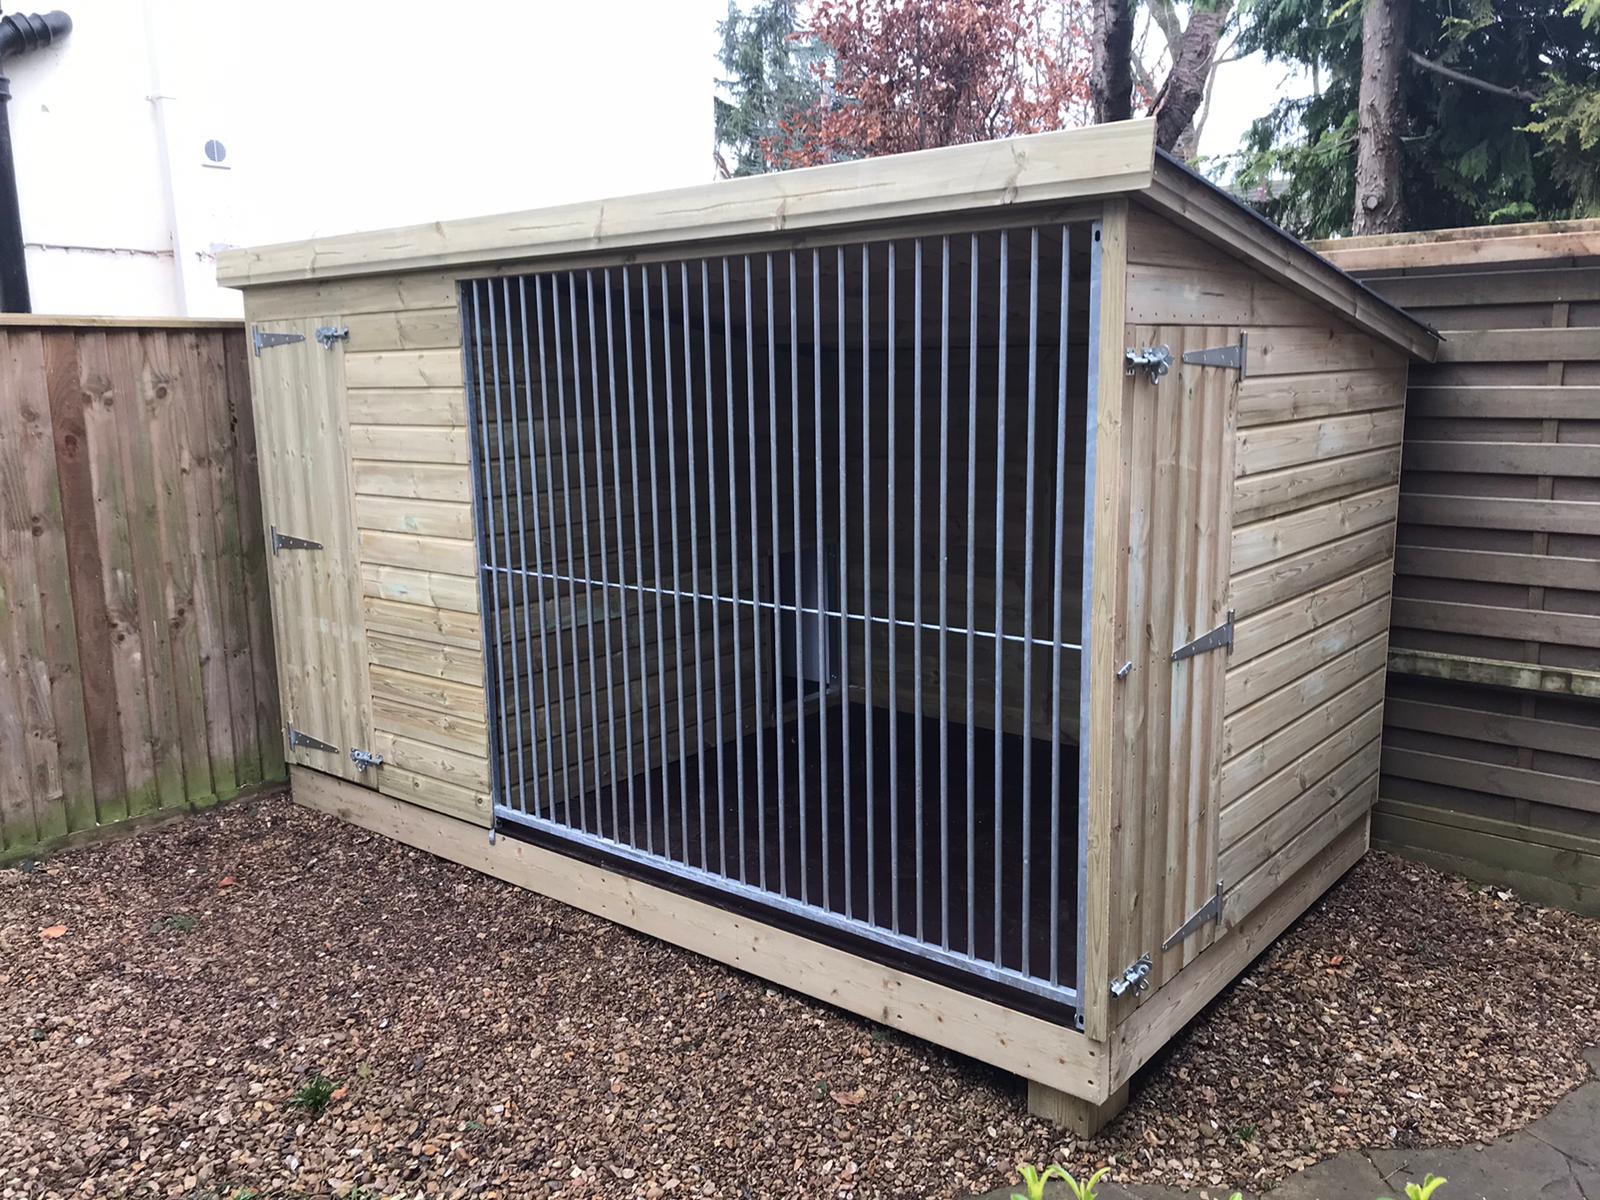 Ettiley Wooden Dog Kennel And Run 10ft (wide) x 5ft (depth) x 5'7ft (high)